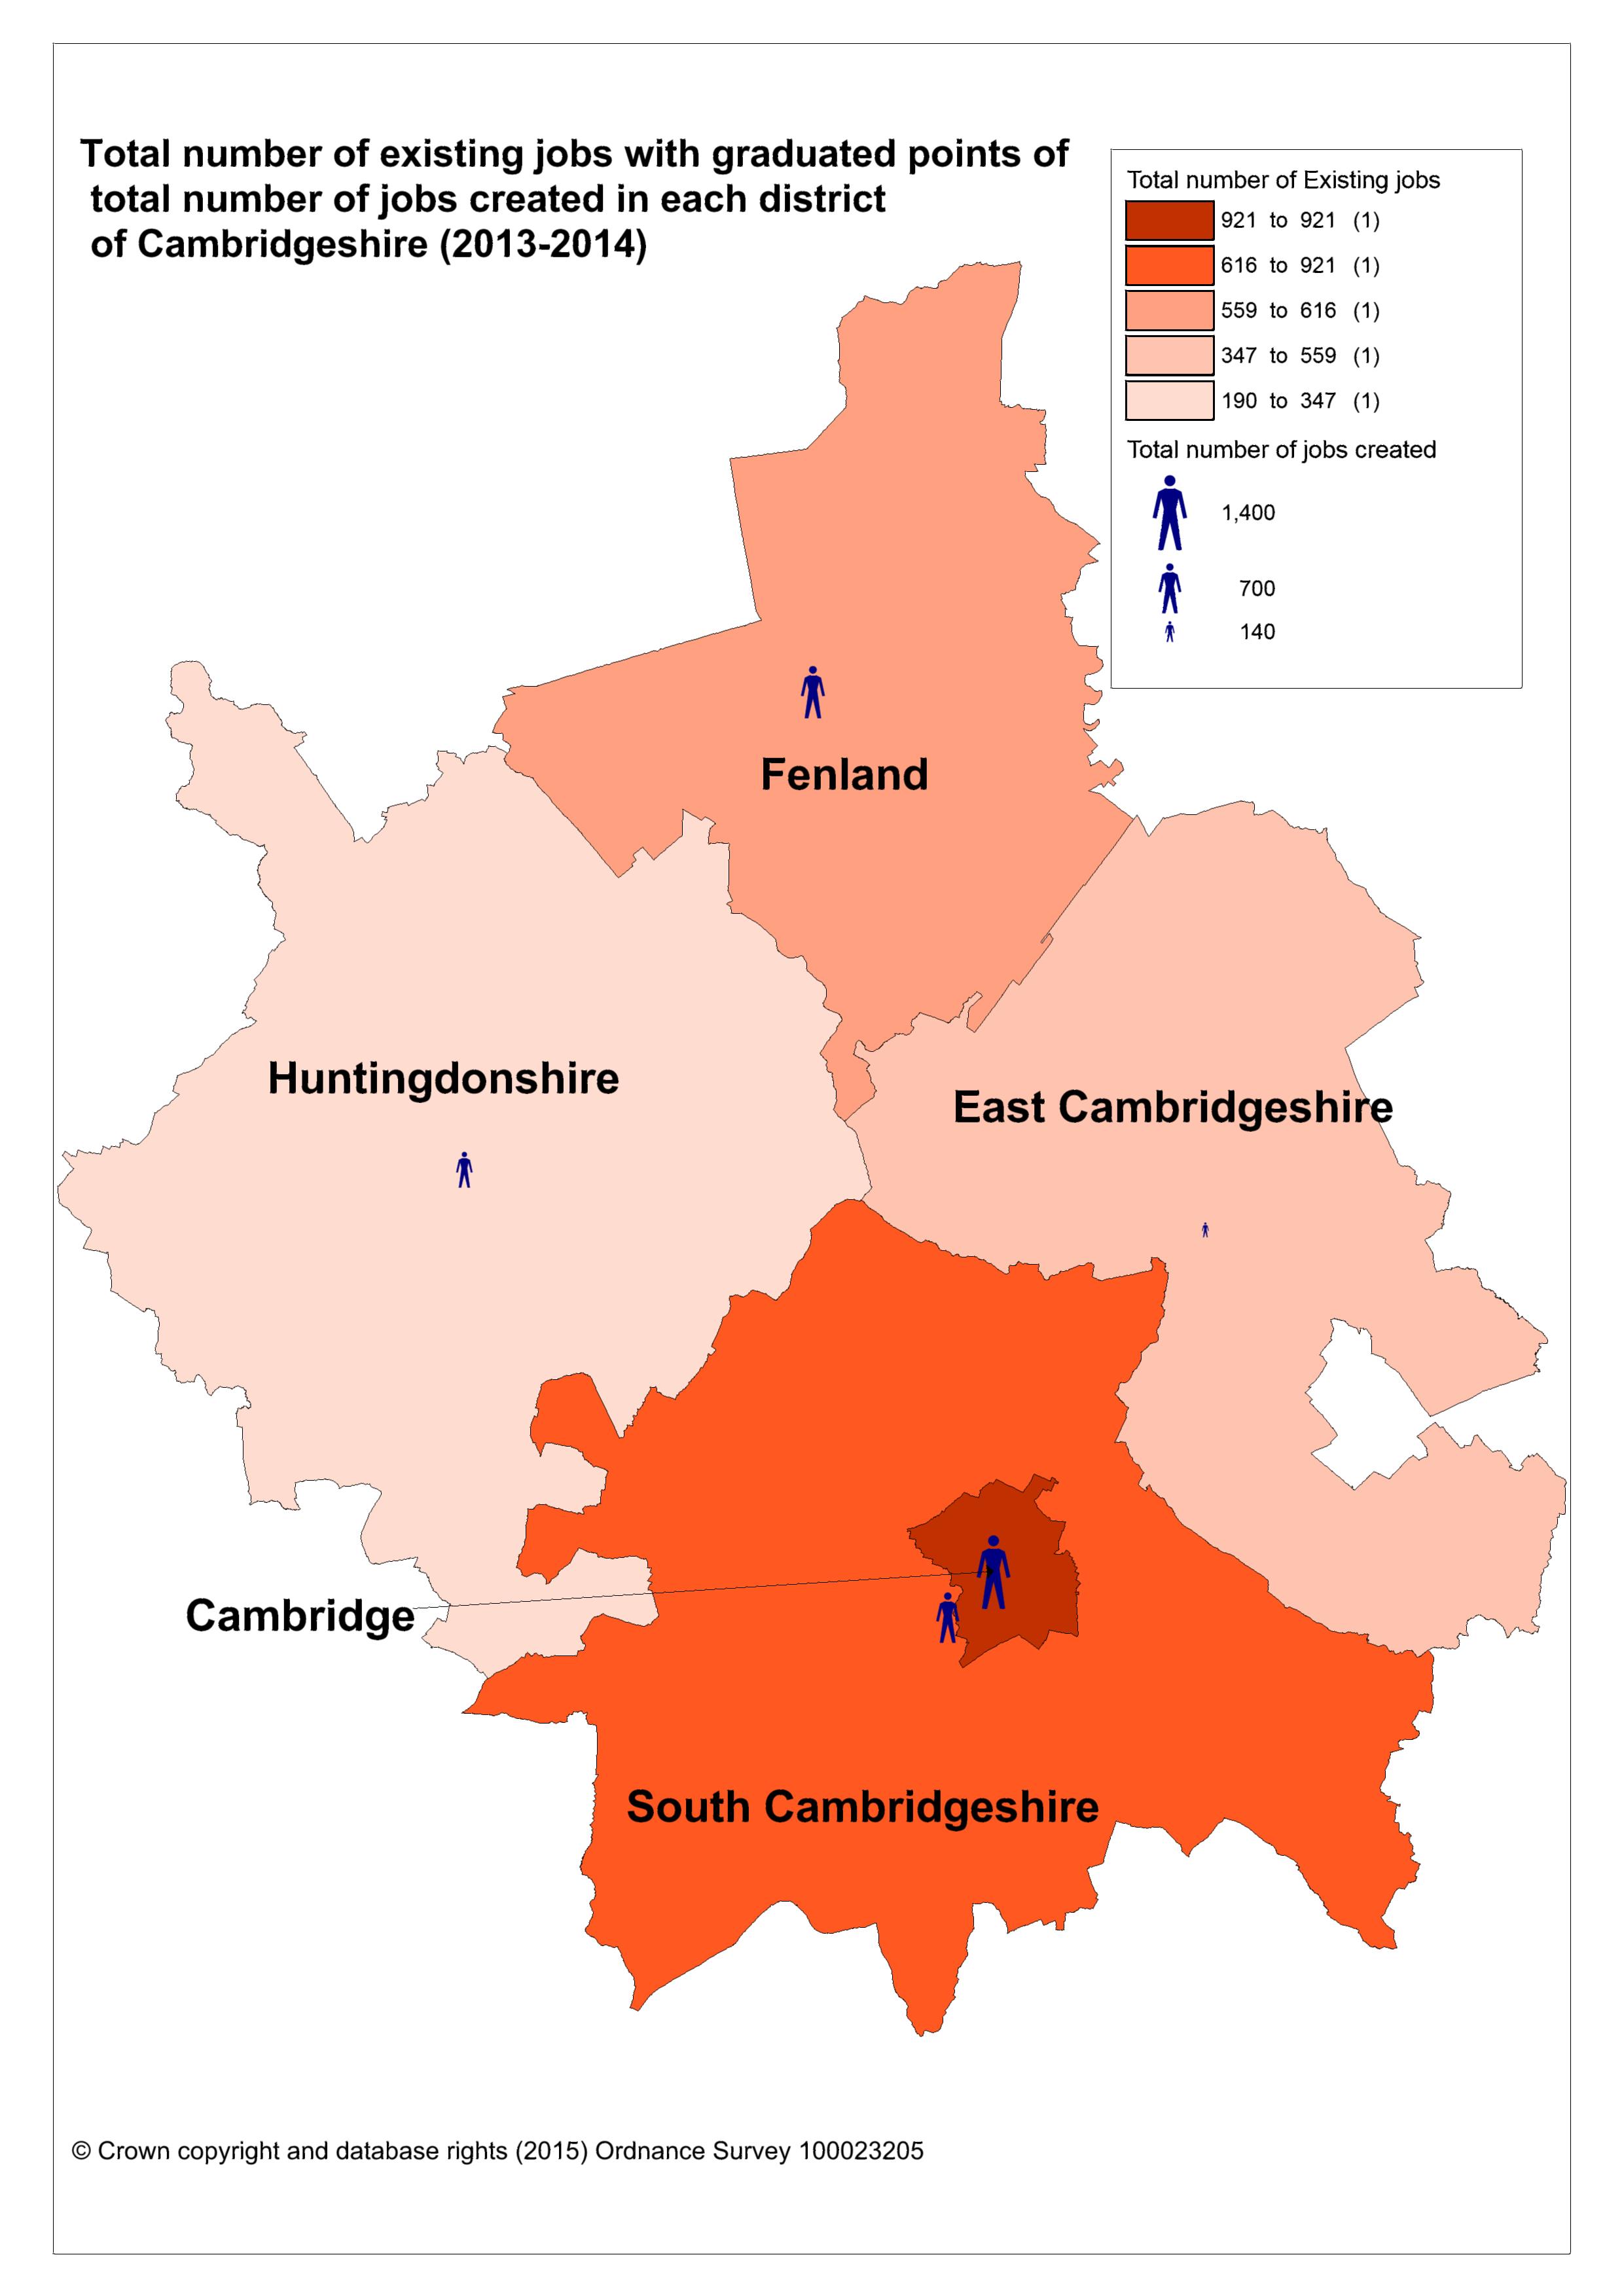 Where are new jobs being created and where are the growth areas within Cambridgeshire?